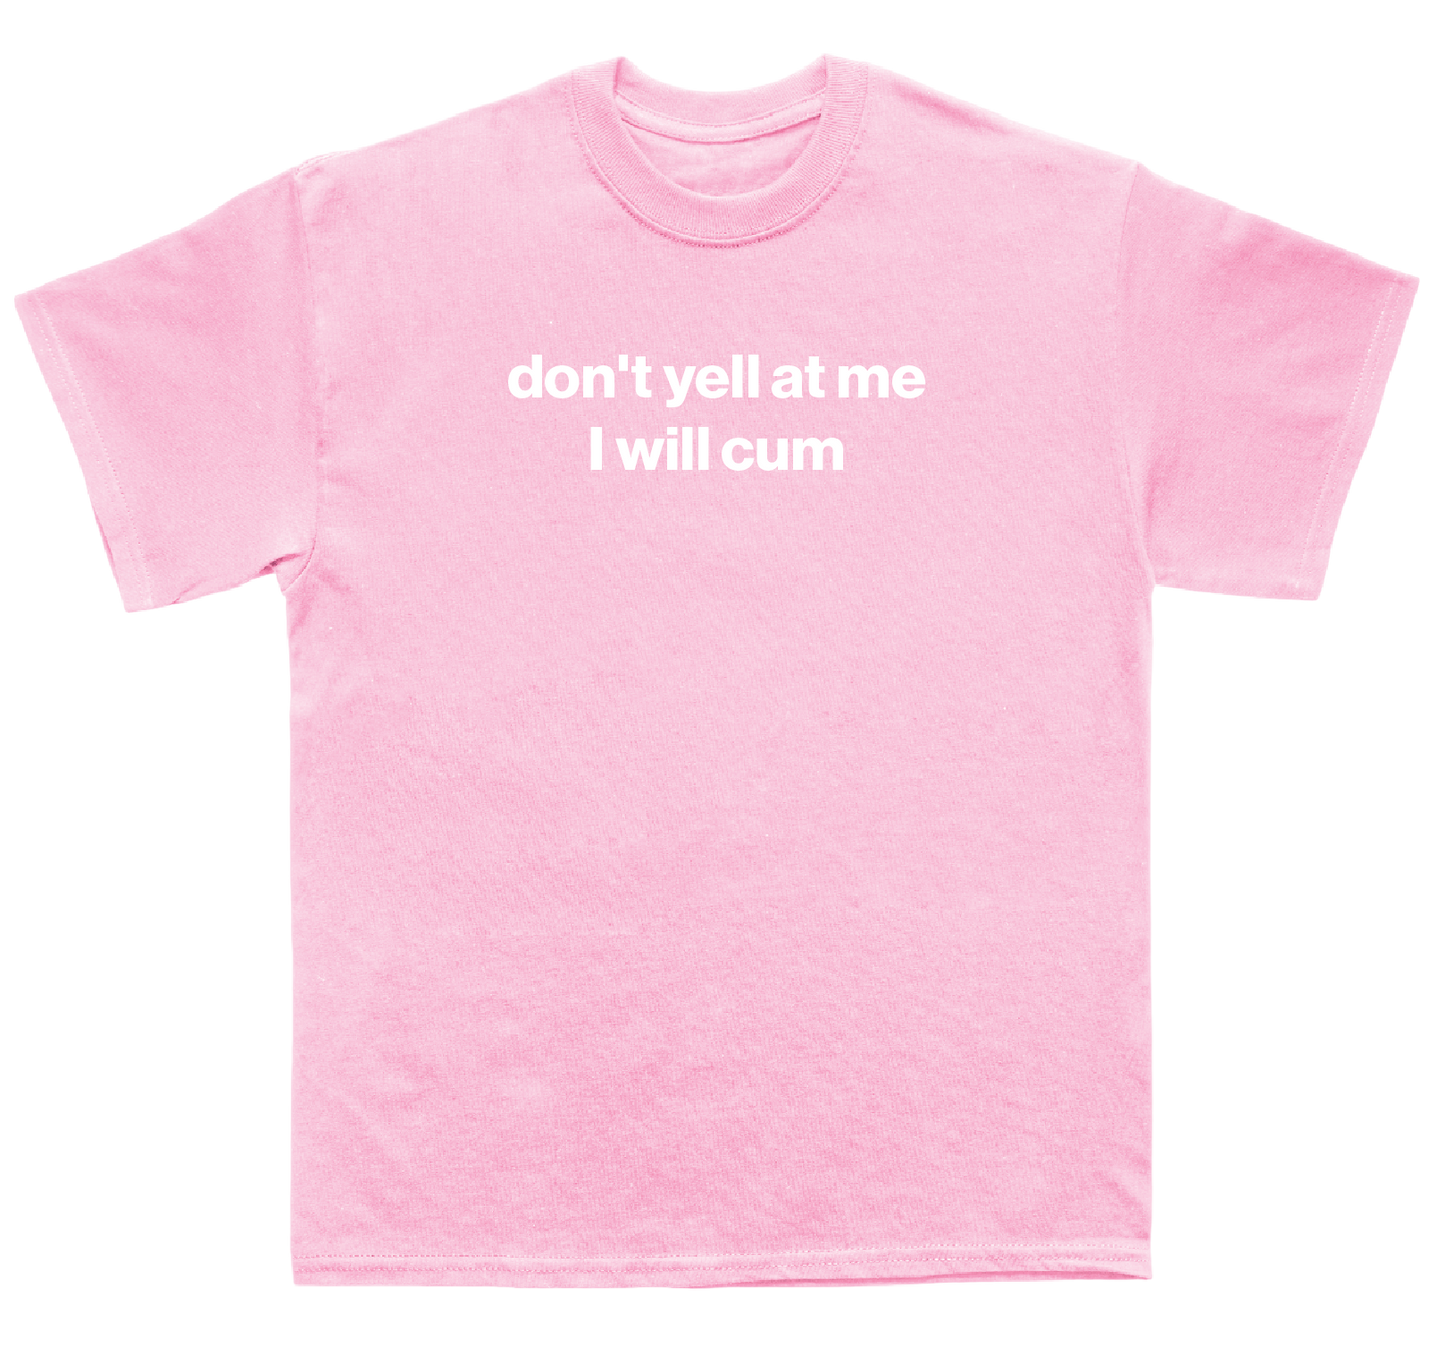 don't yell at me I will cum shirt